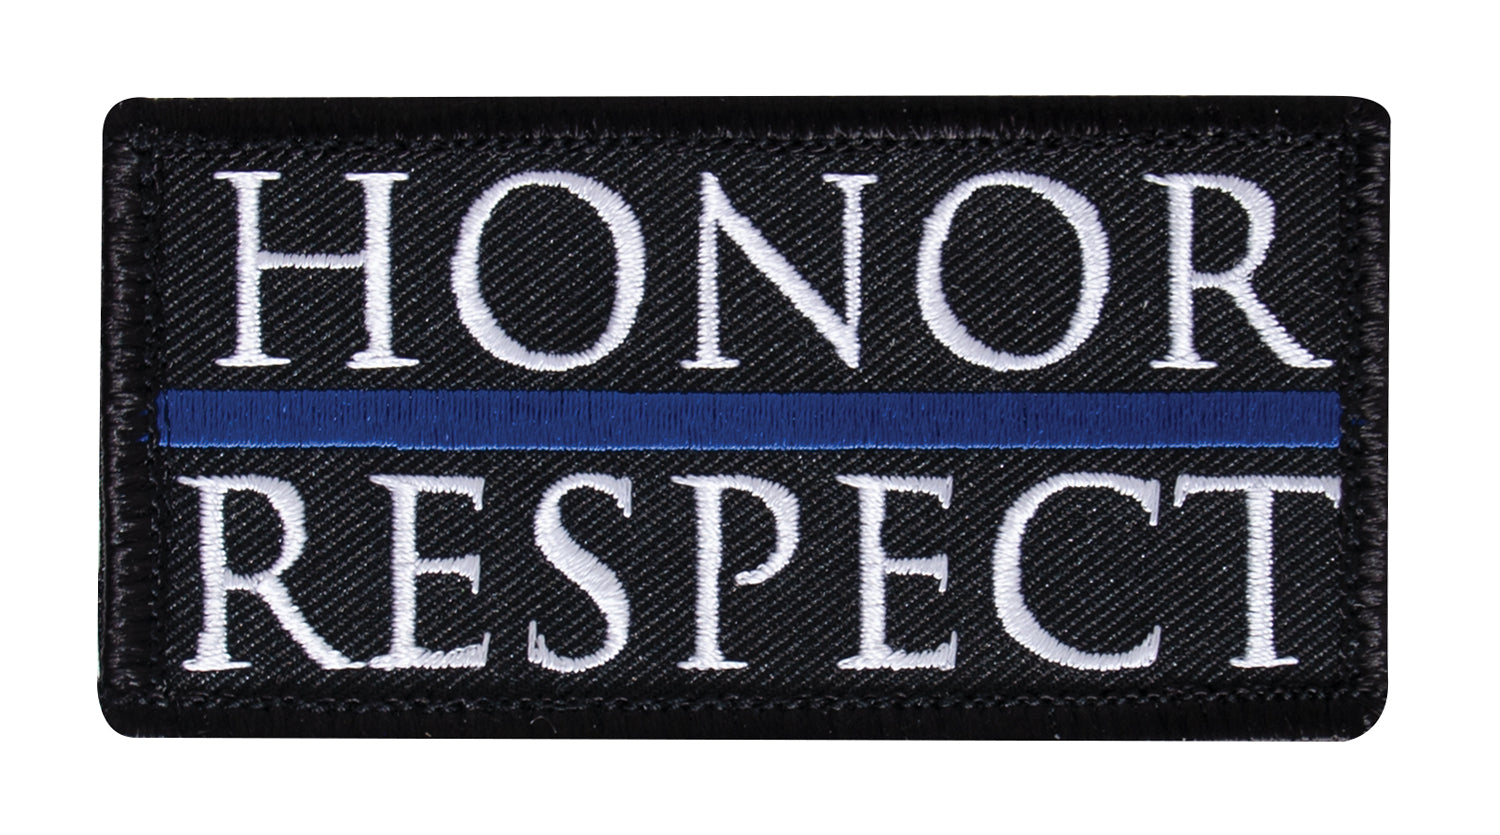 Rothco Honor & Respect Morale Patch